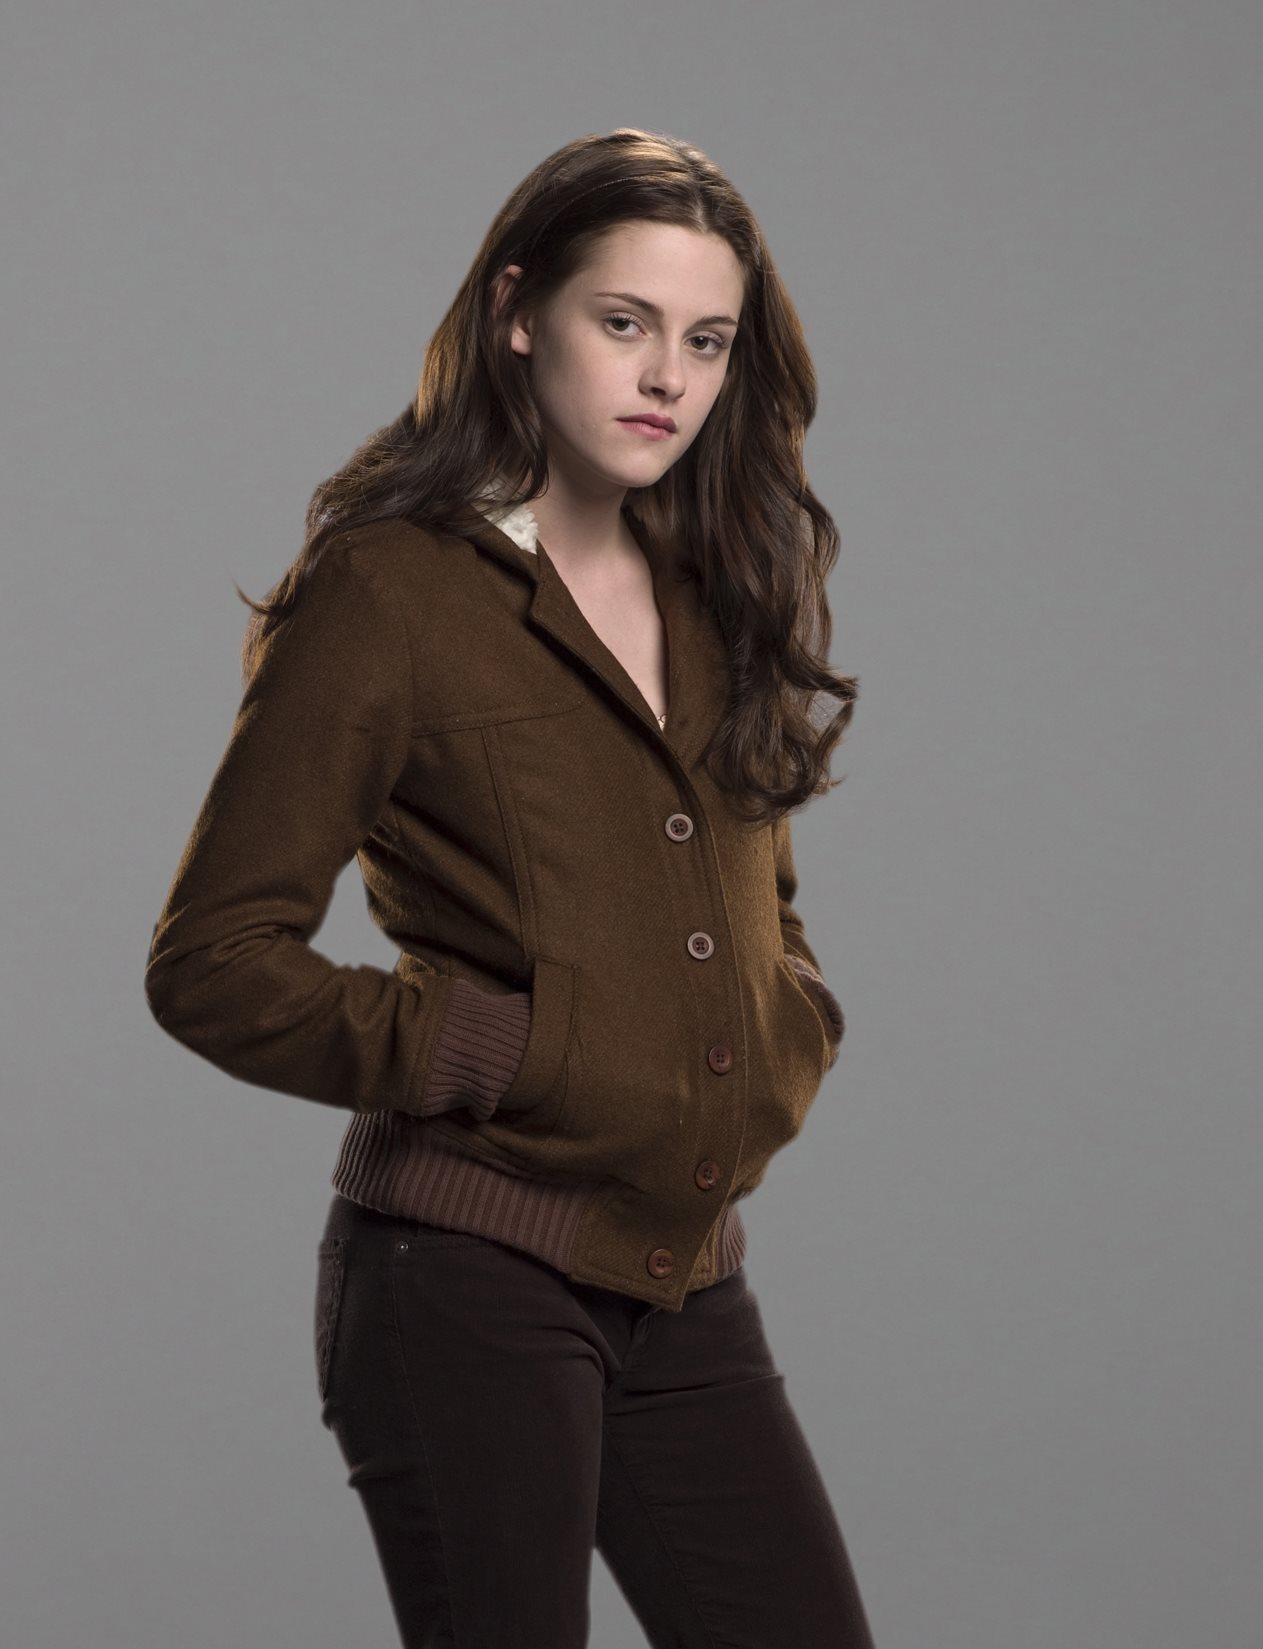 Bella Swan’s Hooded Jacket and Shirt - Current price: $1000